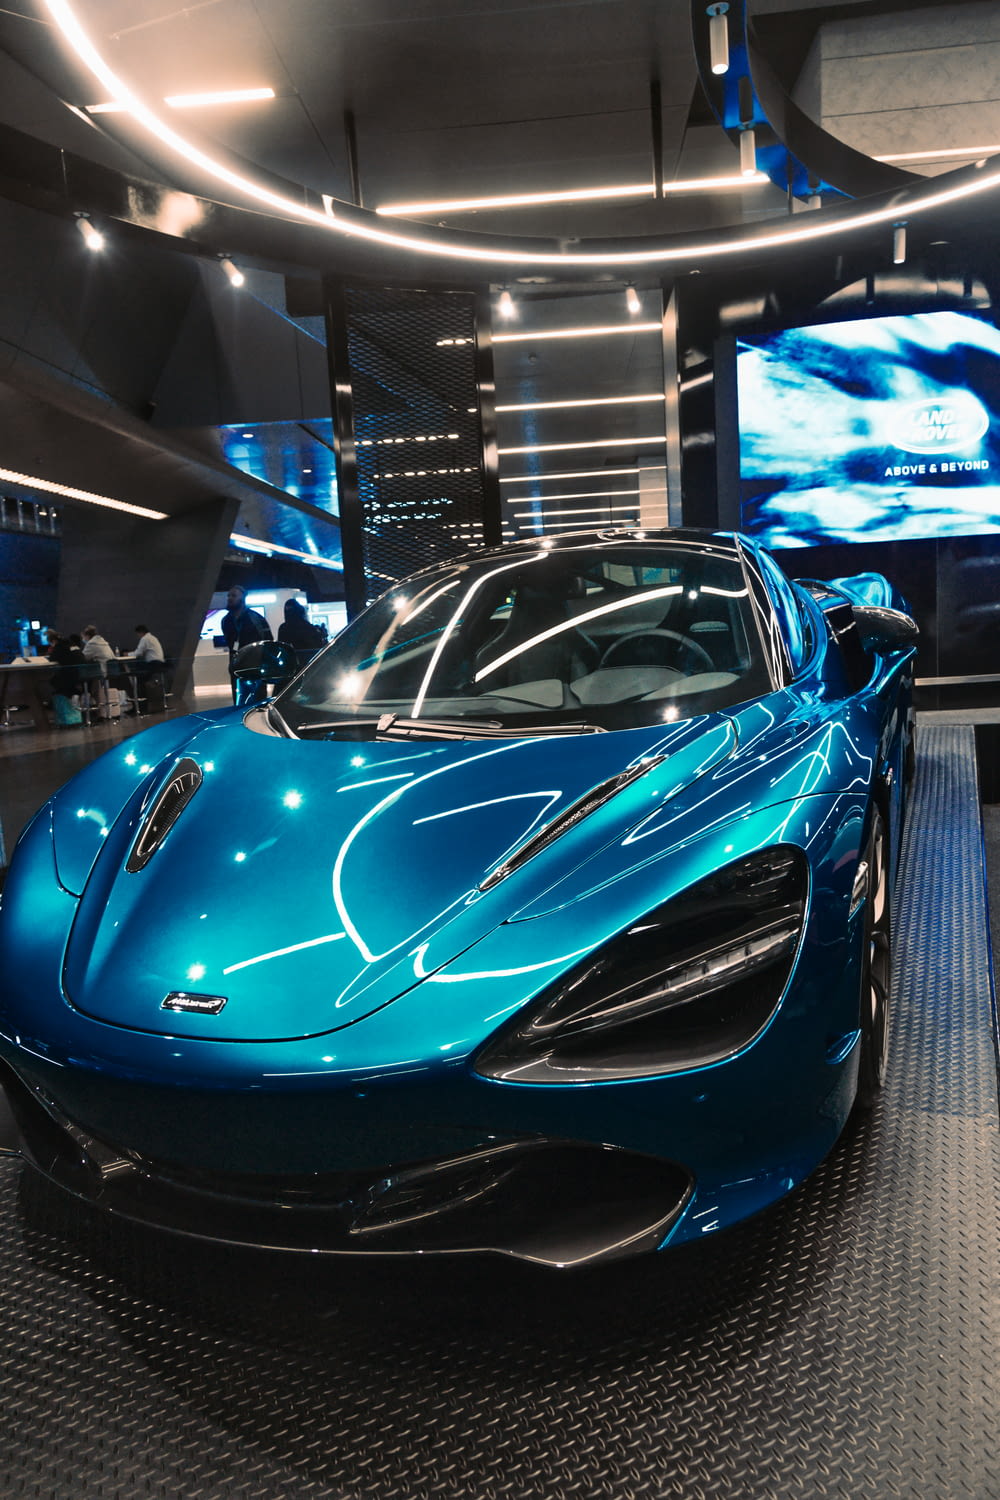 a shiny blue sports car in a showroom